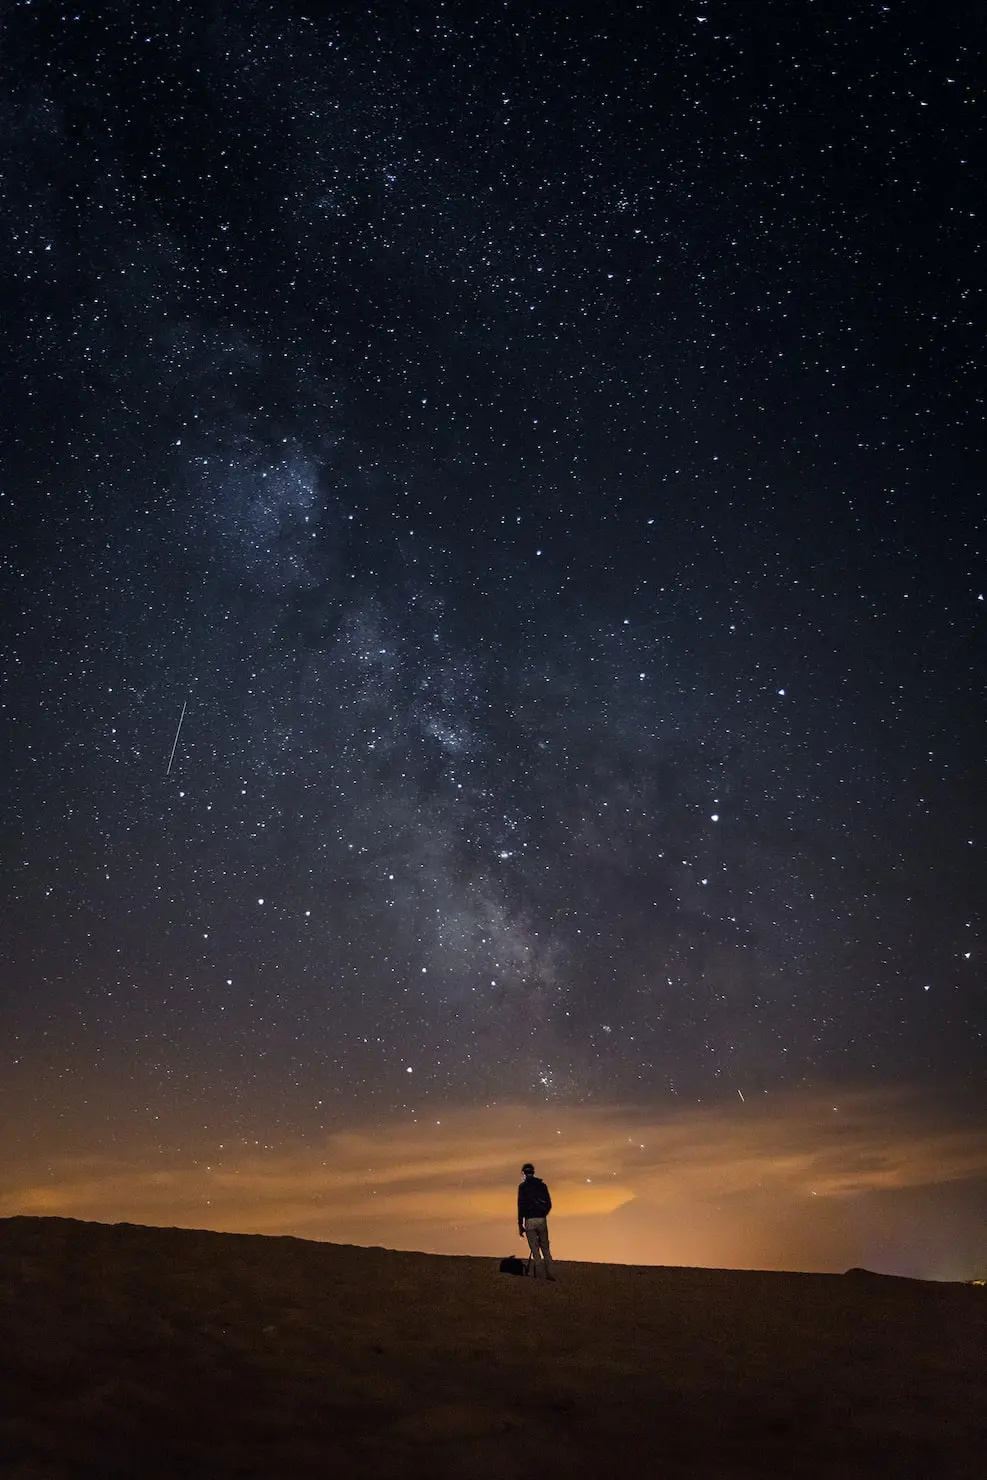 a person standing on top of a hill, looking at the night sky with a fallin star